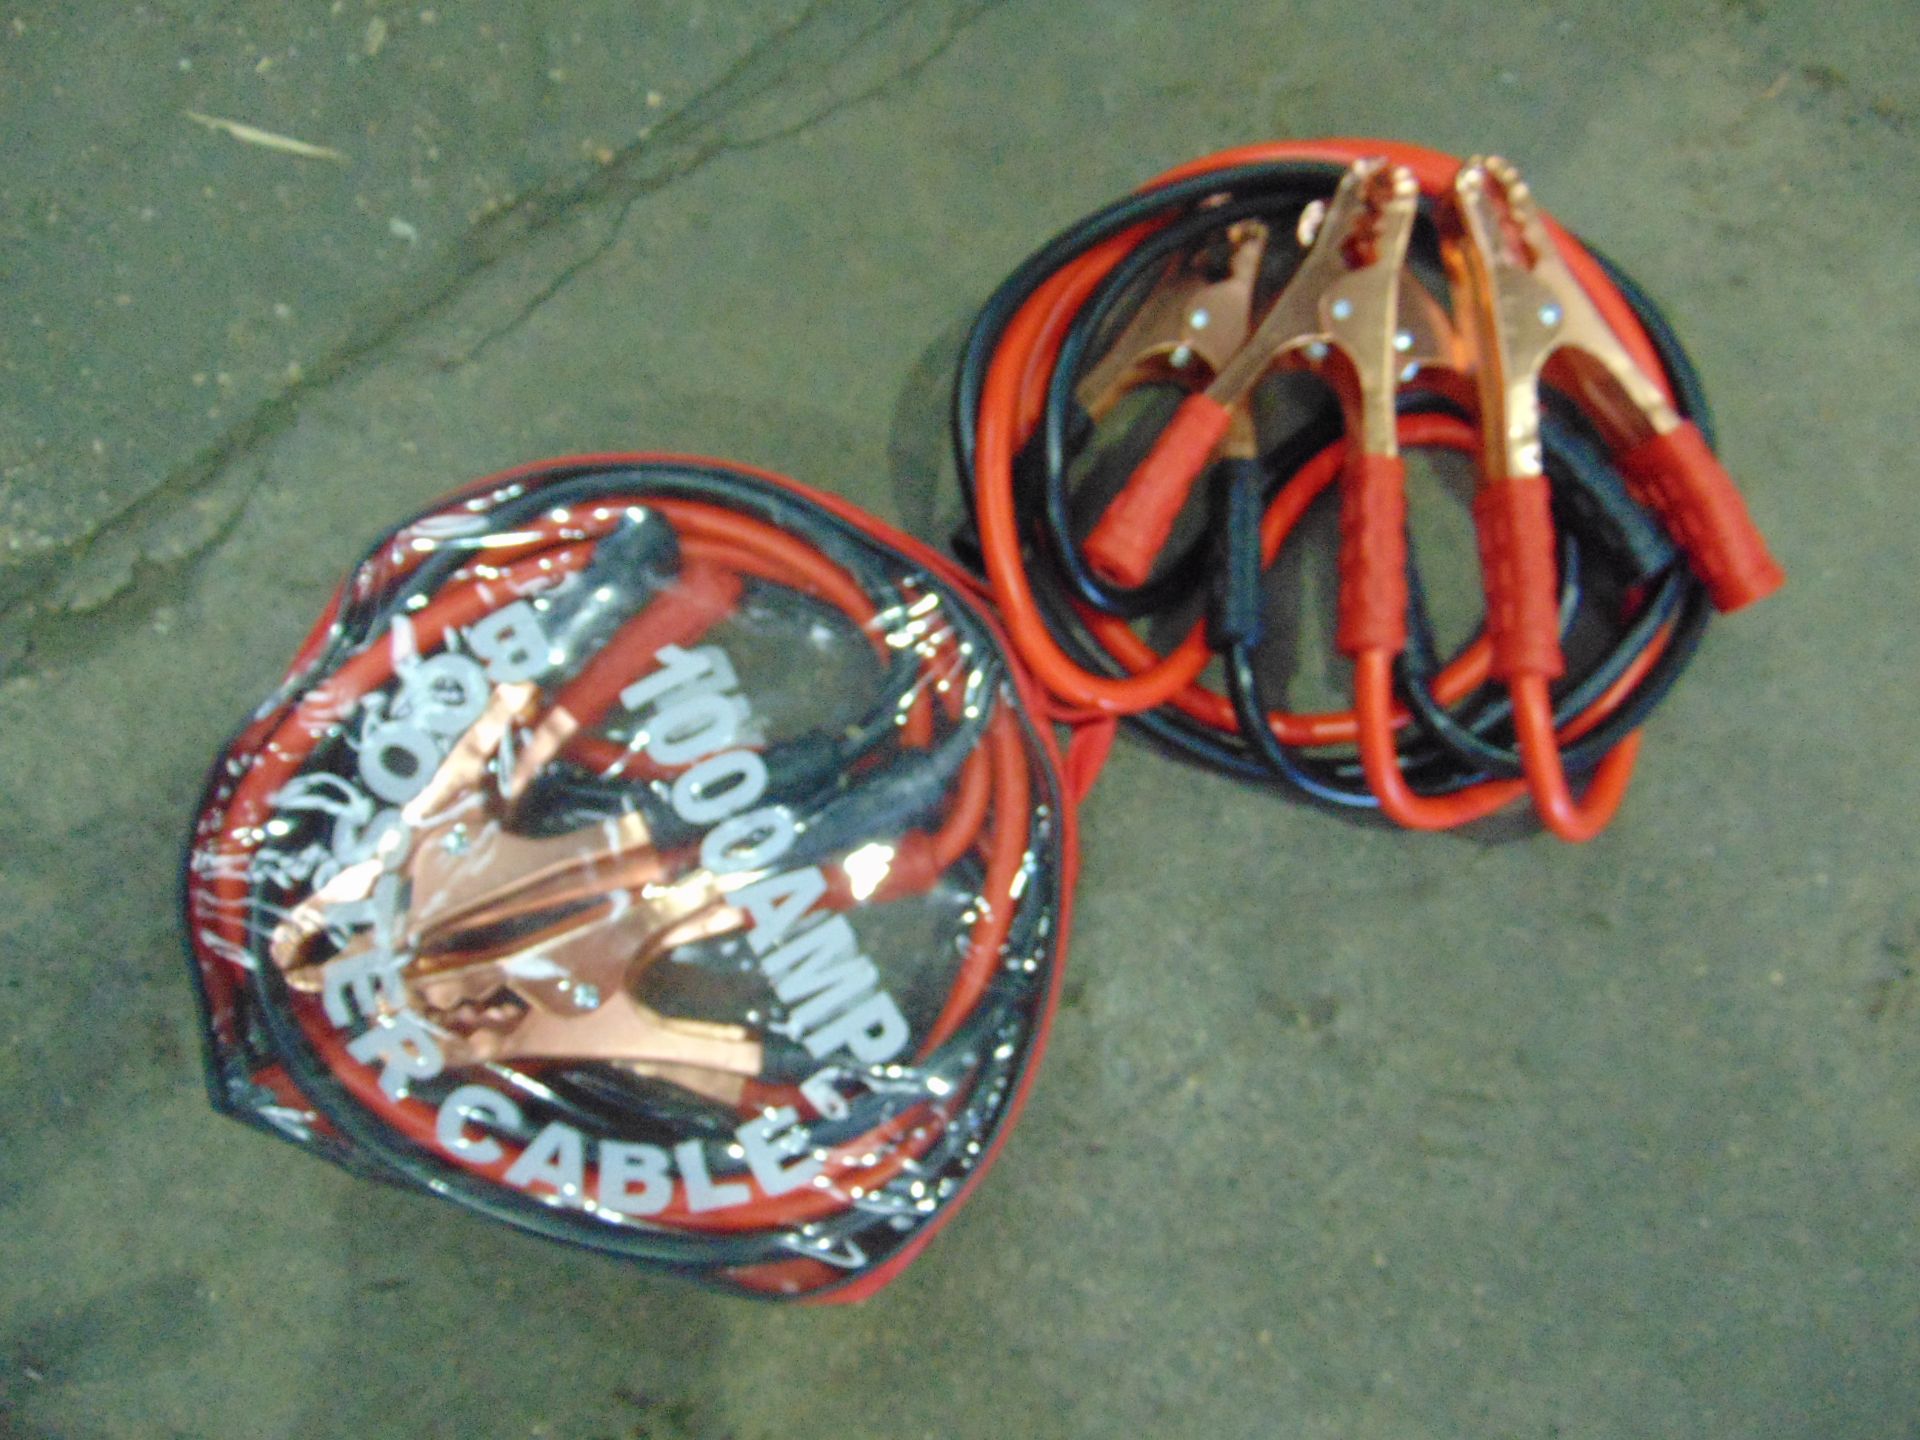 2 x UNISSUED Heavy Duty 100AMP Booster Jump Start Cable Sets.